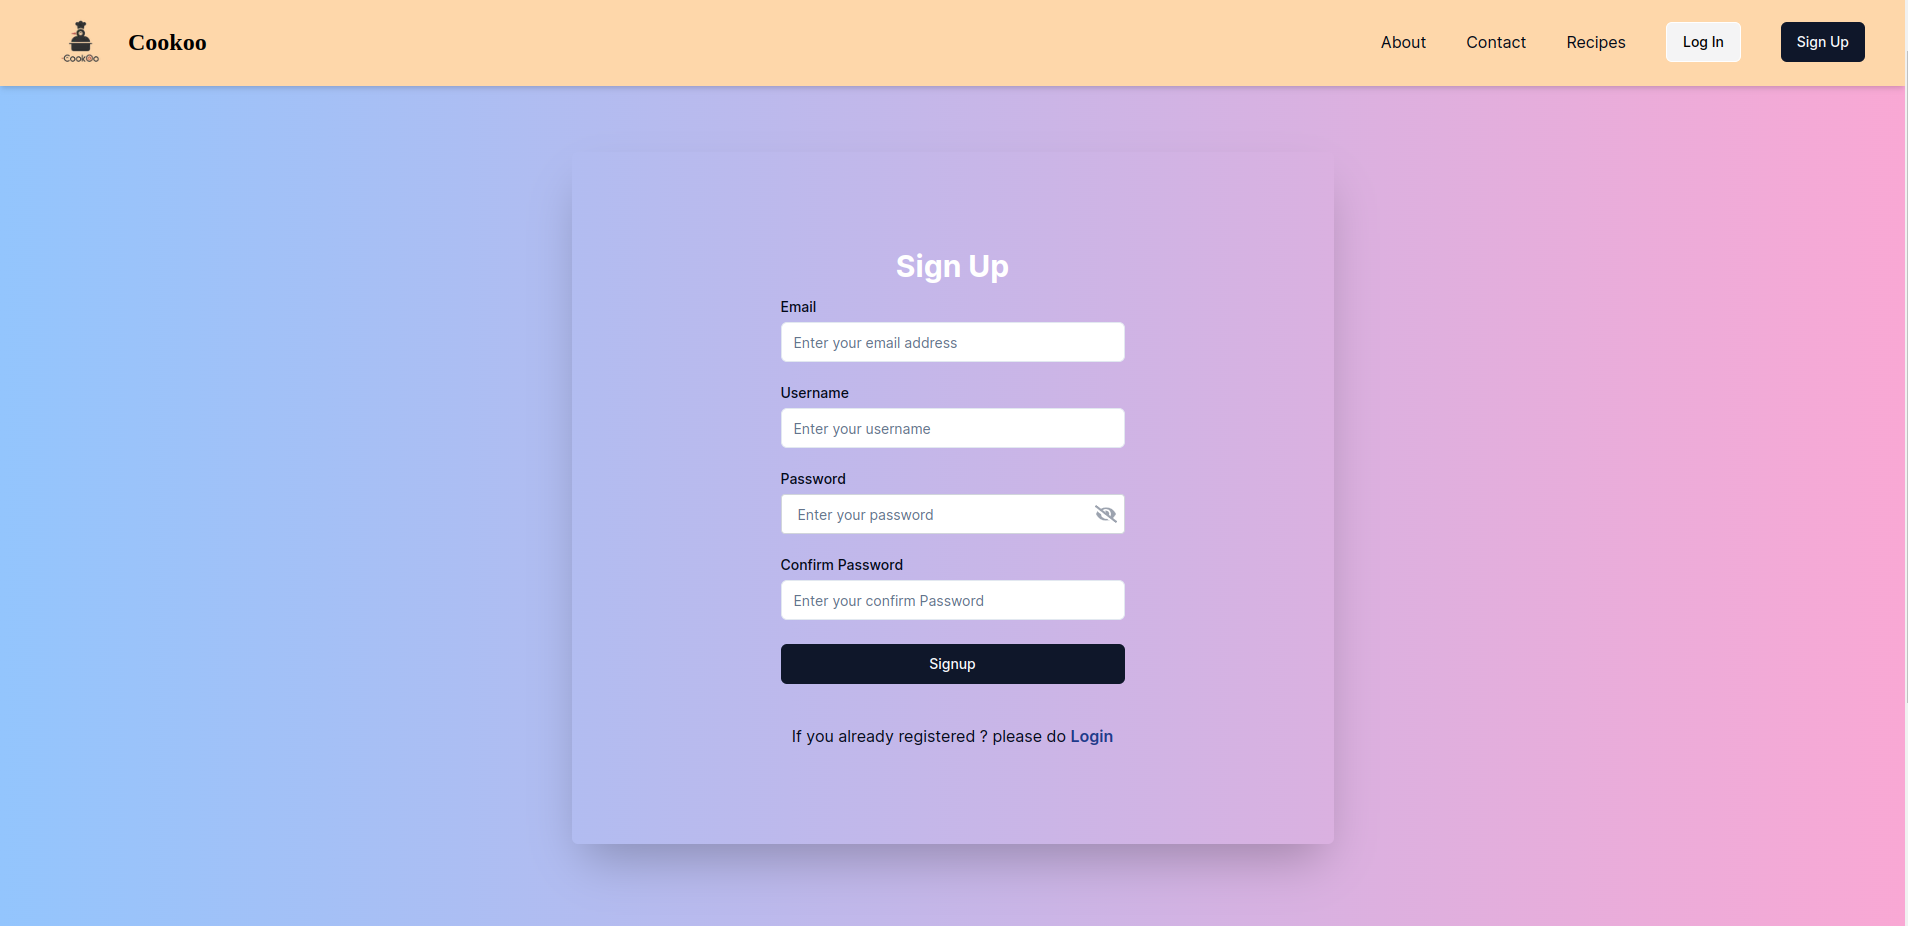 The Signup page